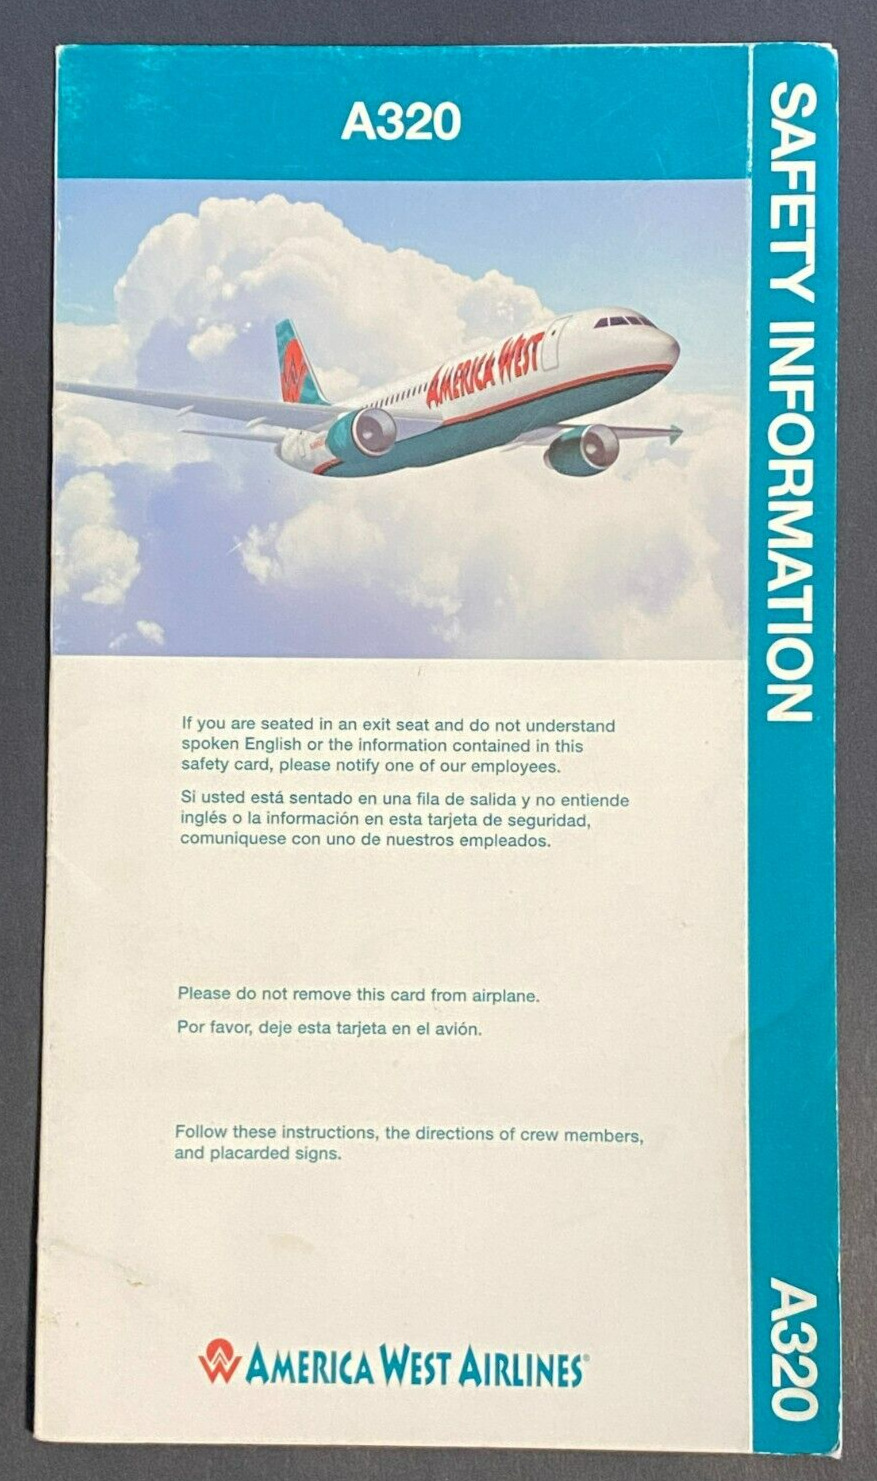 America West Airlines Airbus A320 Safety Card - 03/02